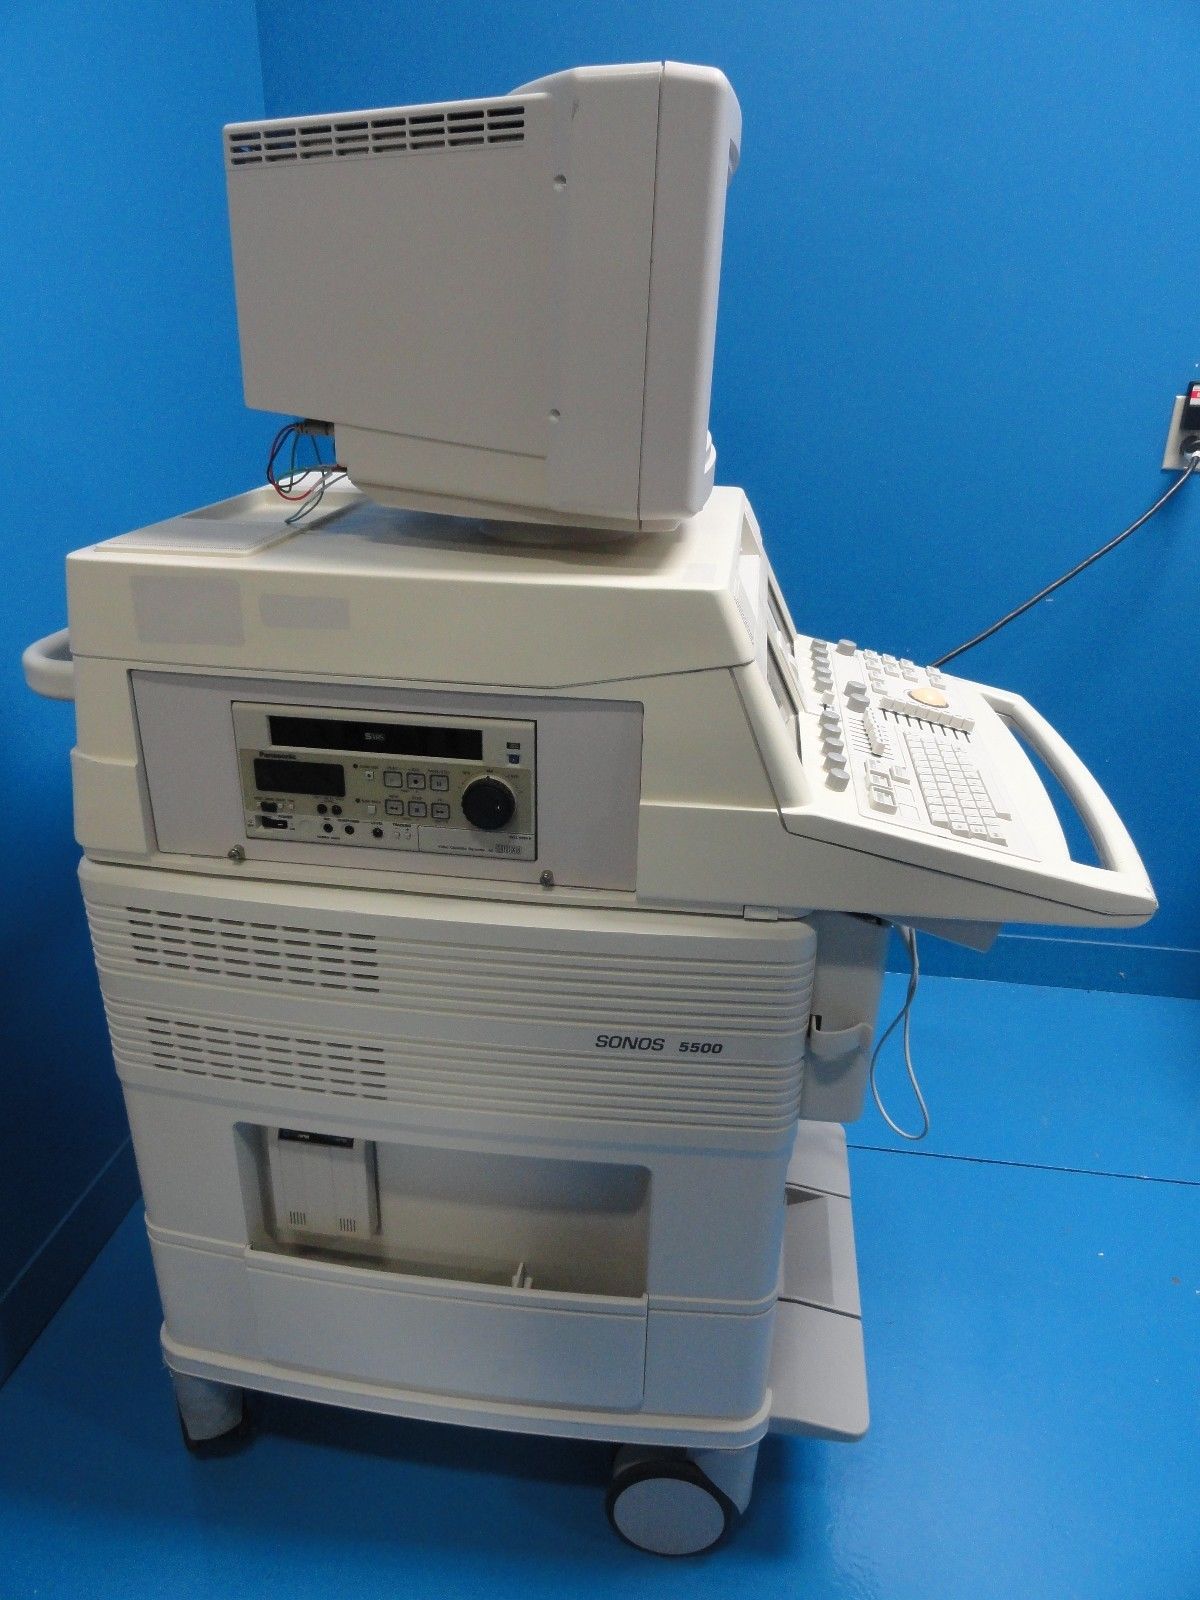 2004 Philips Agilent HP Sonos 5500 M2424A Ultrasound W/ S12 Transducer (8241) DIAGNOSTIC ULTRASOUND MACHINES FOR SALE